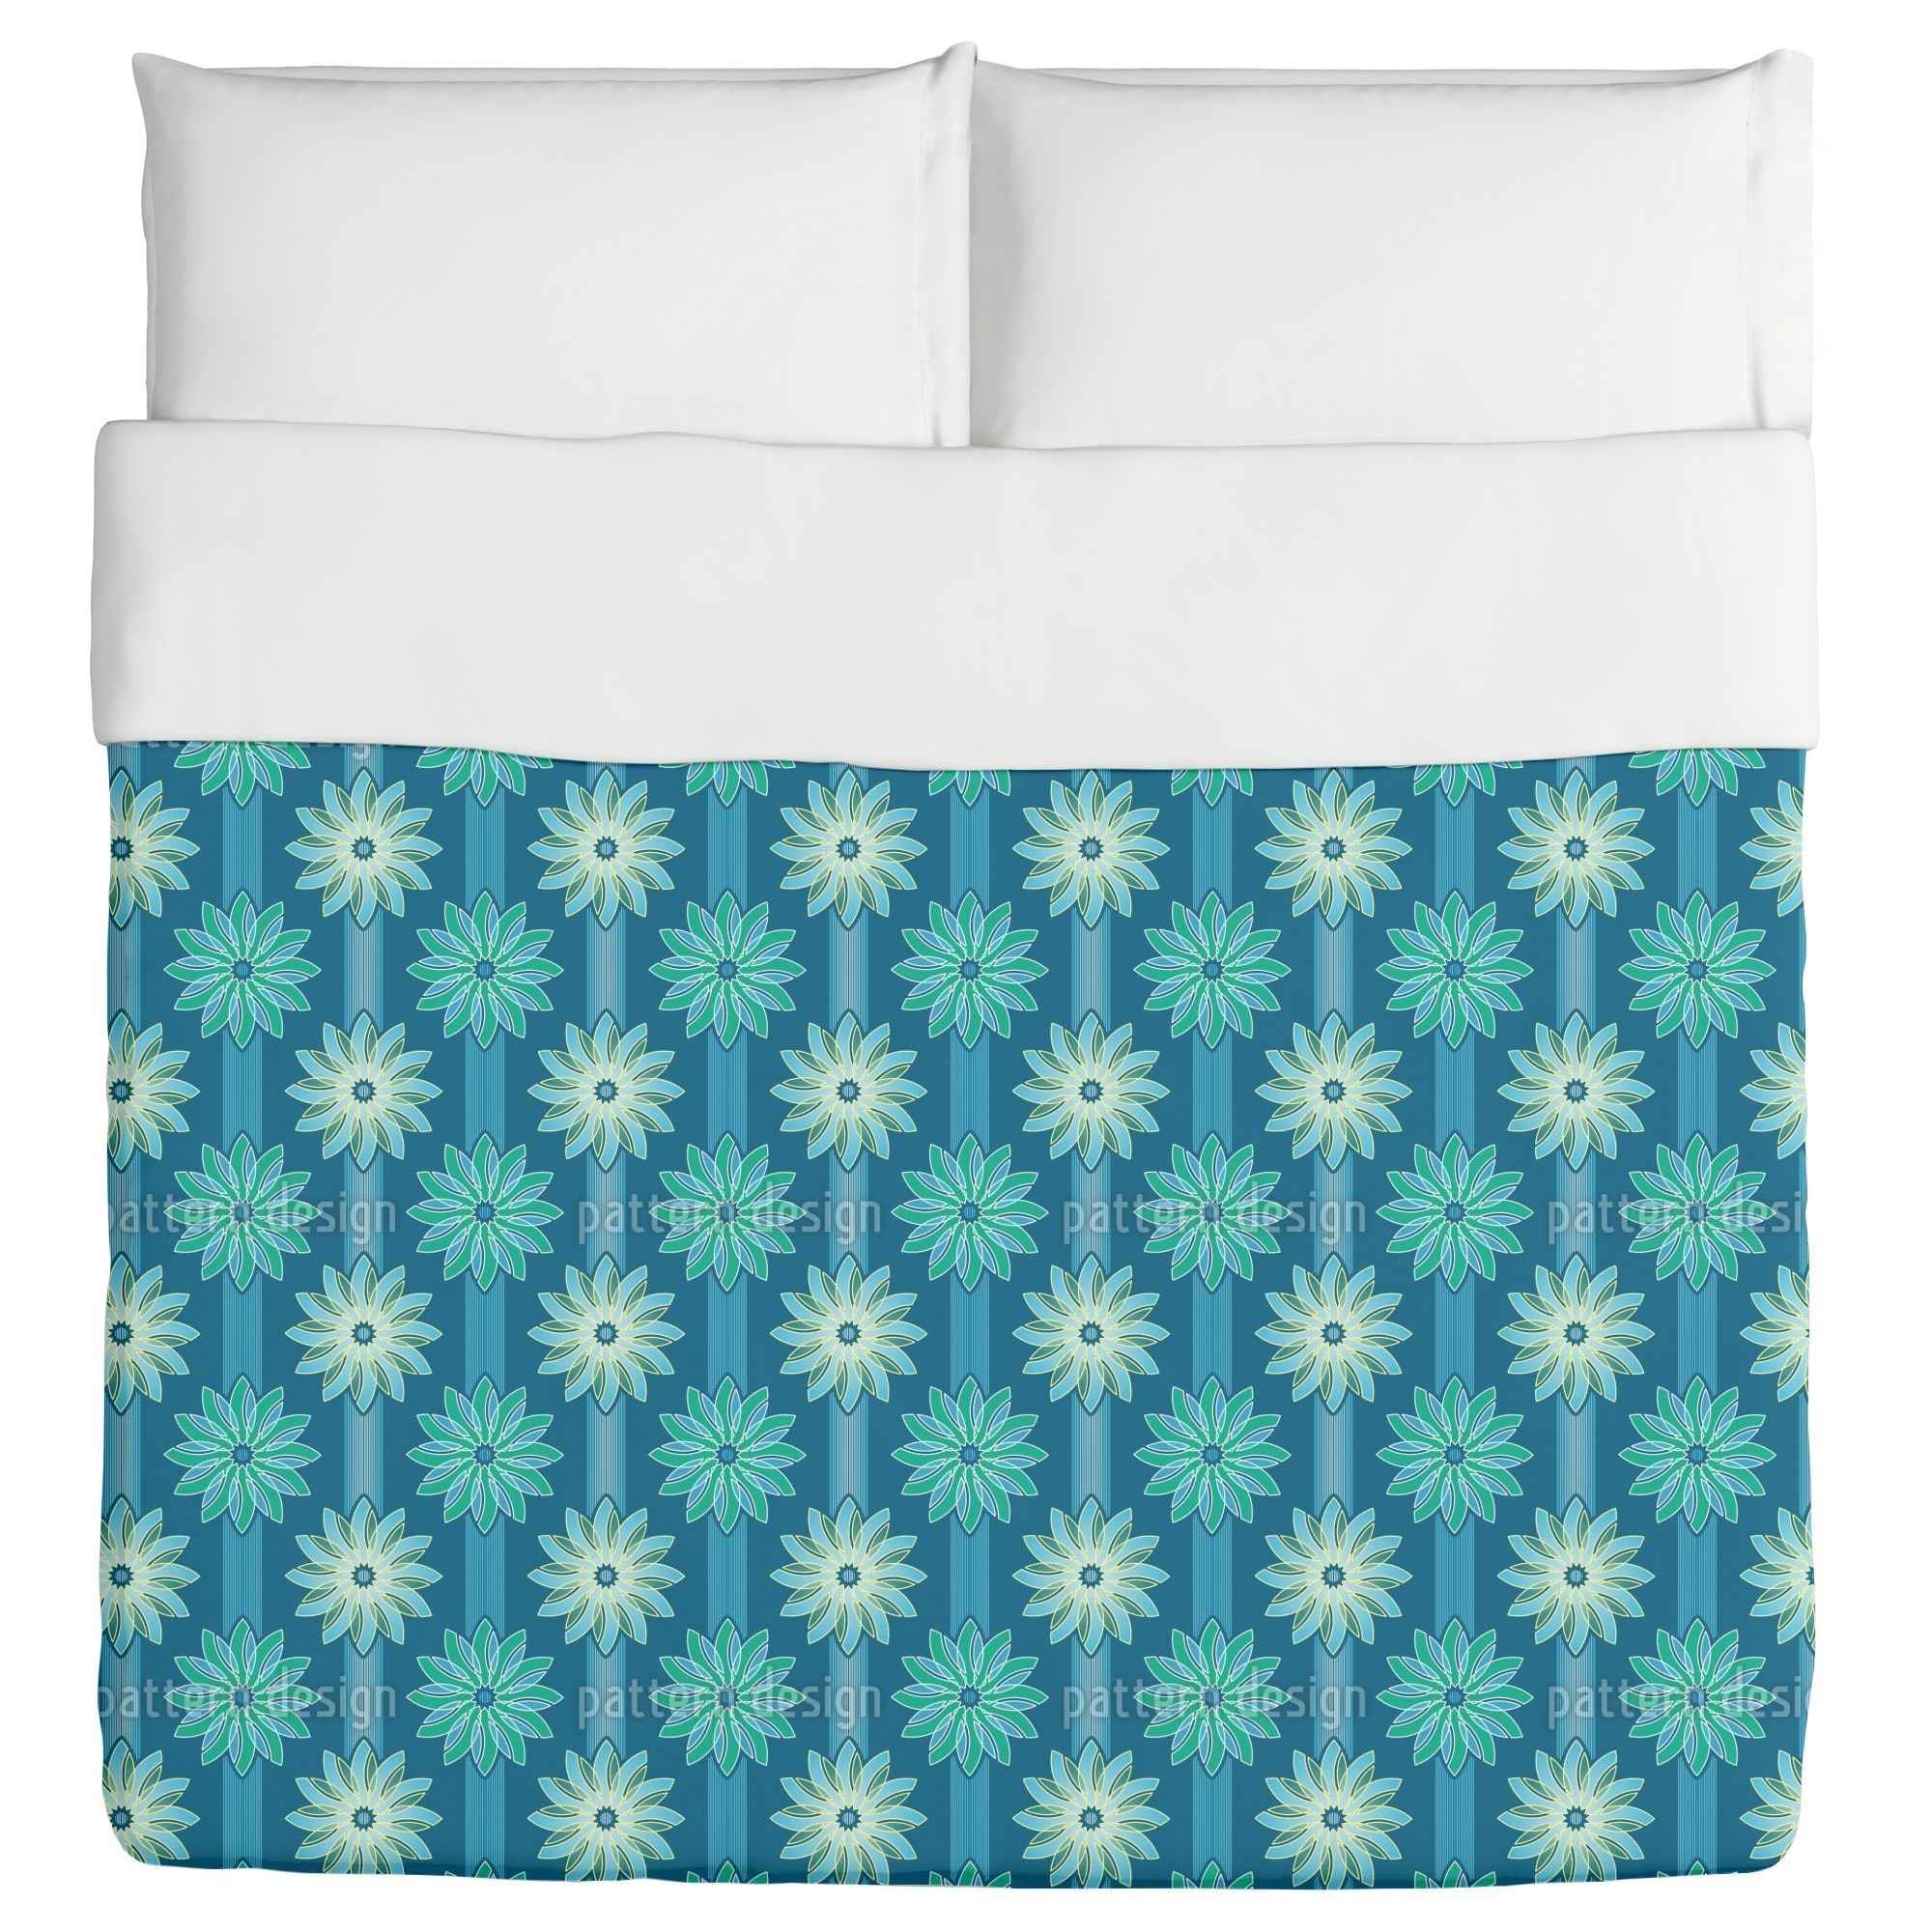 Shop Cool Wall Duvet Free Shipping Today Overstock 12535993